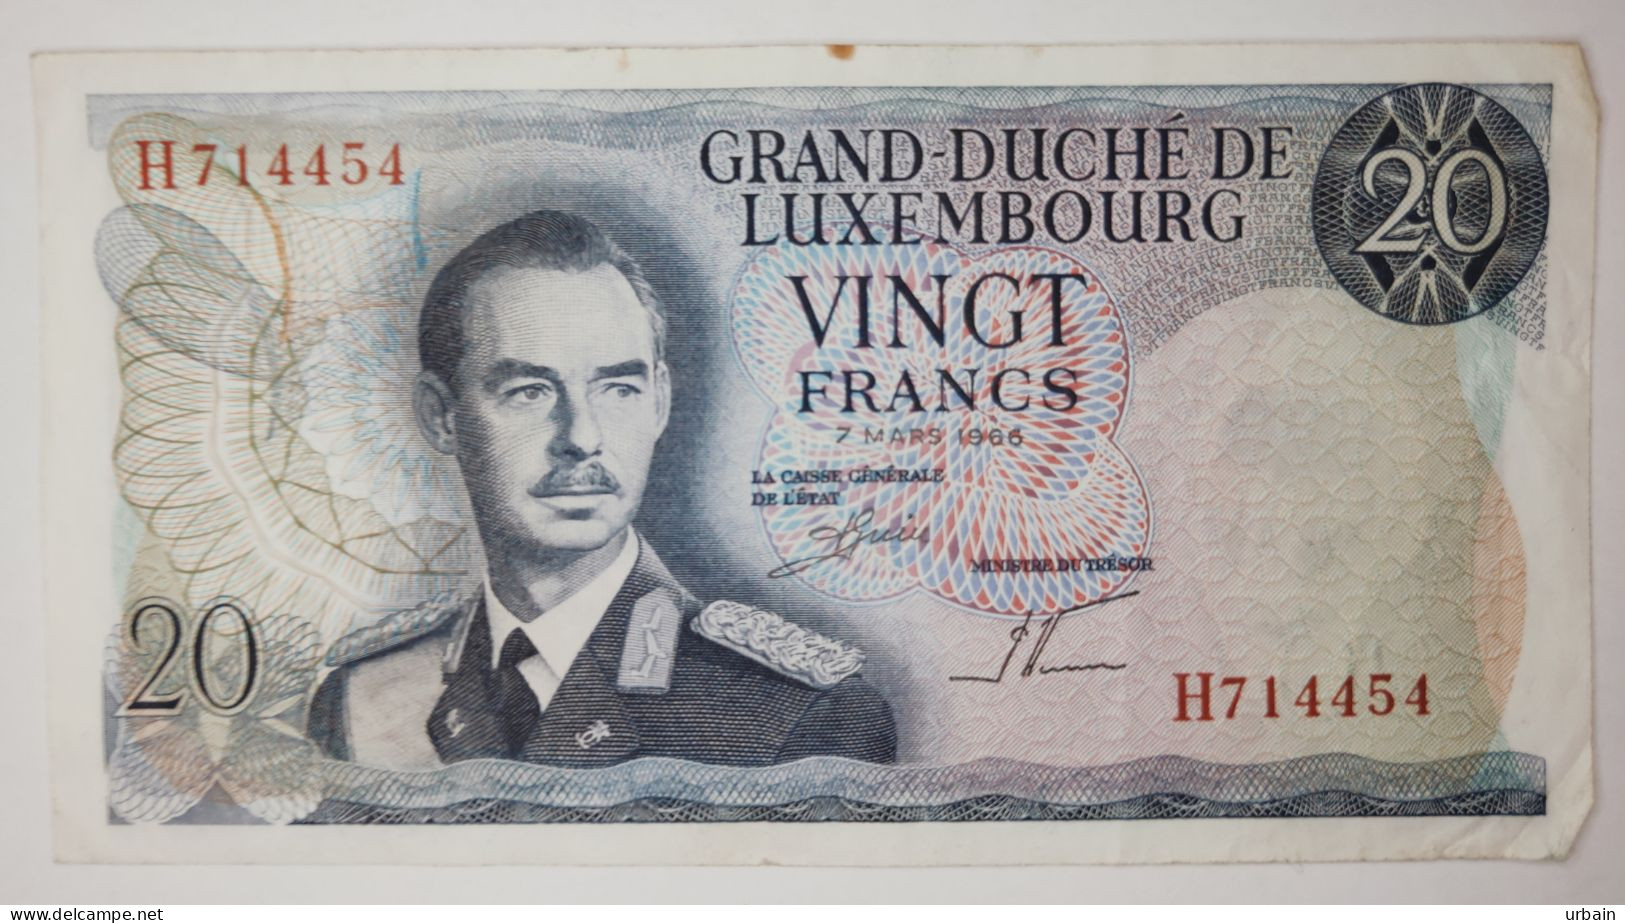 Batch Of 5 Banknotes - Luxembourg - 20 Francs - 7 Mars 1966 - Luxembourg